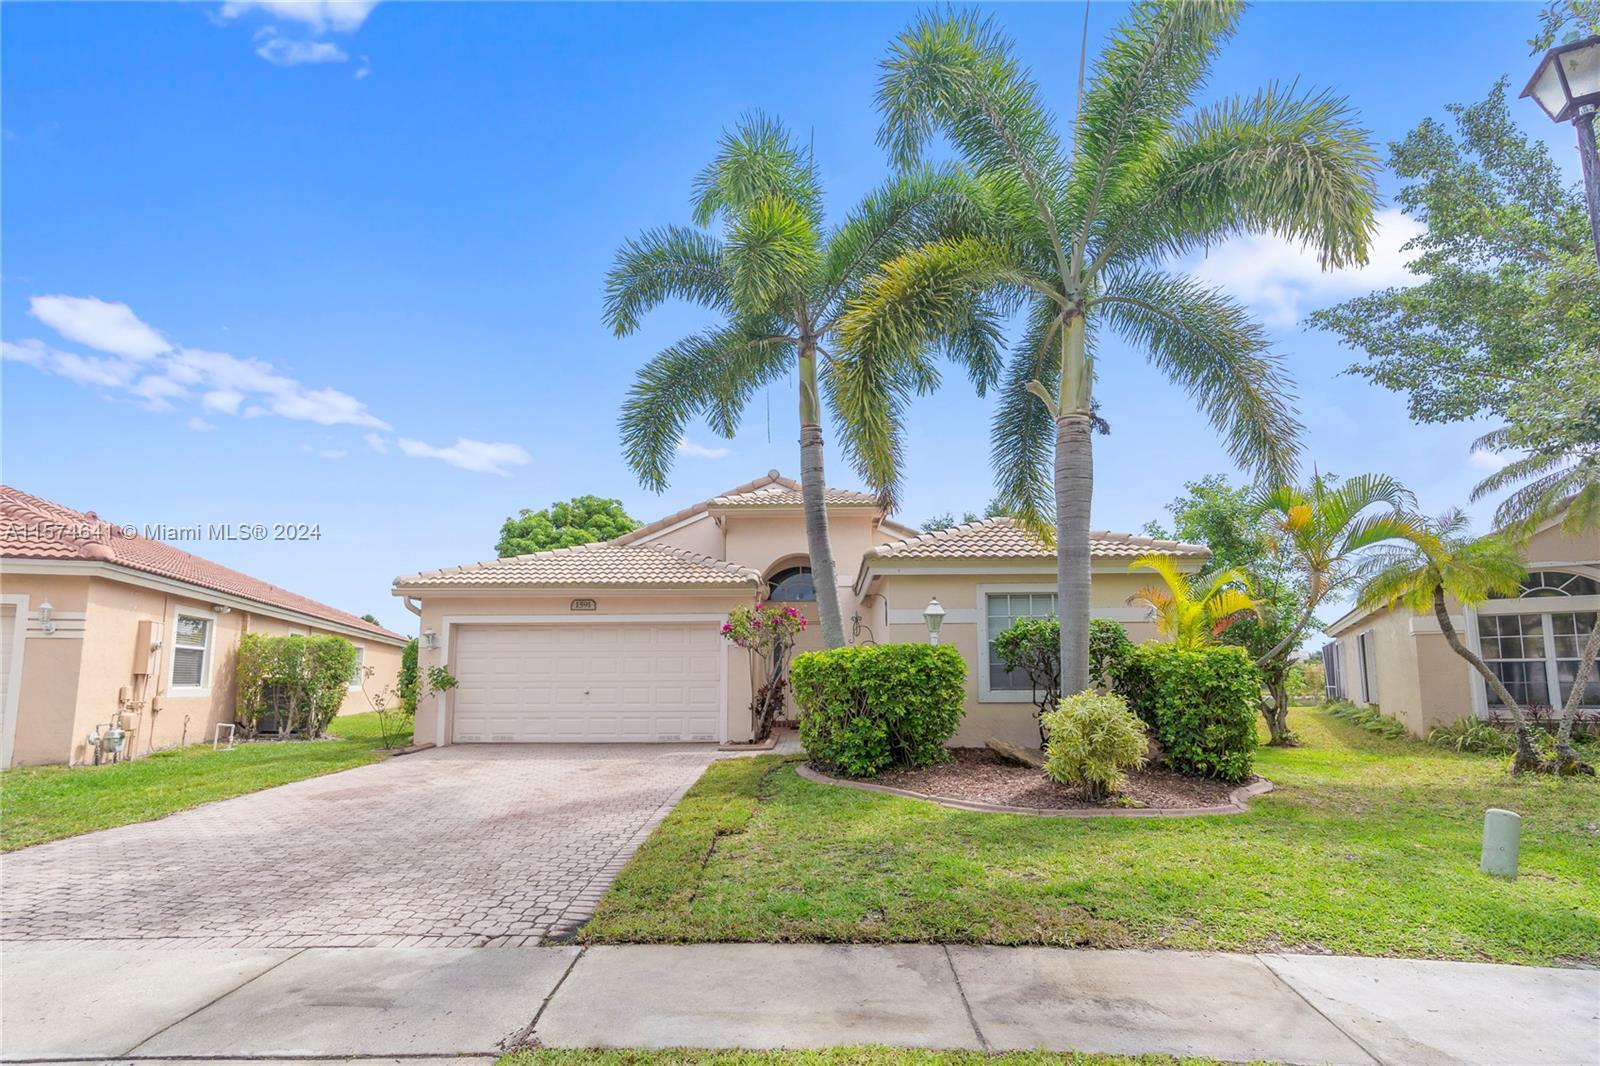 Photo of 1591 NW 132nd Ave in Pembroke Pines, FL